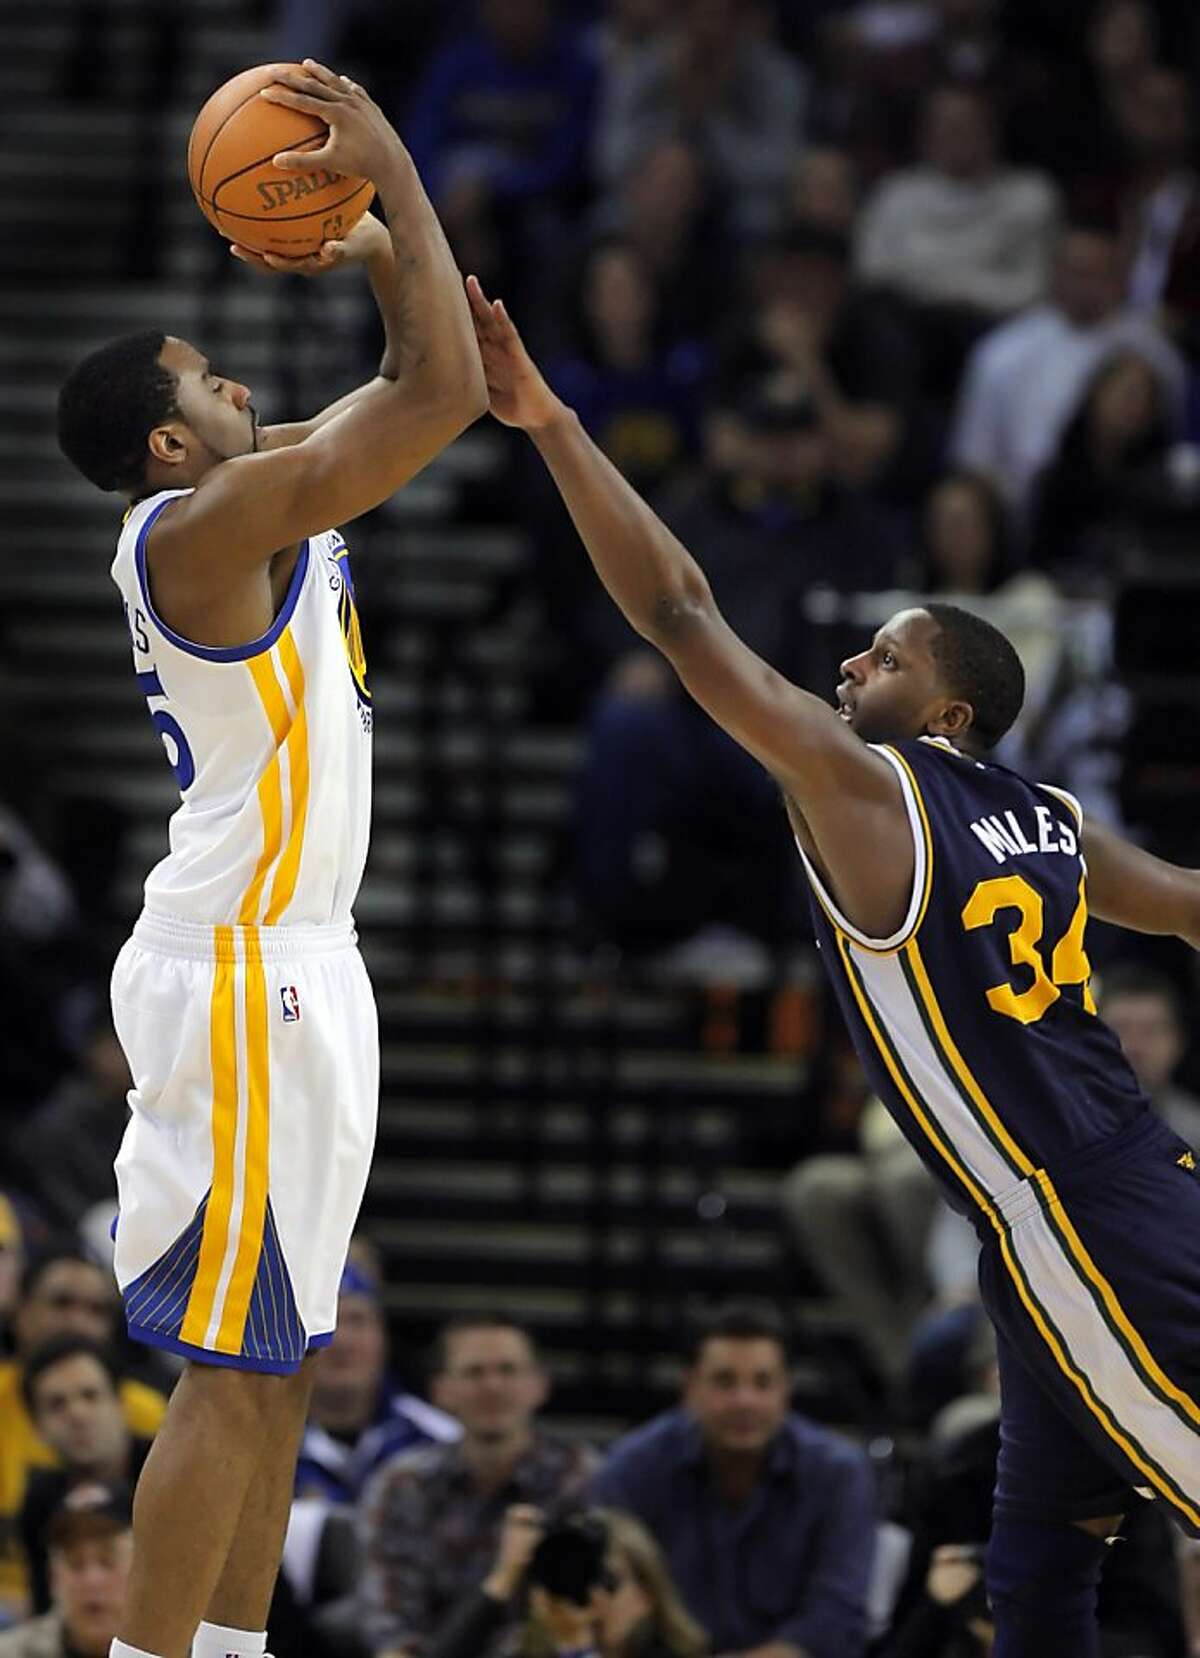 Reggie Williams puts up a shot in the fourth quarter as he is defended by Utah's C. J. Miles at Oracle Arena in Oakland on Sunday.